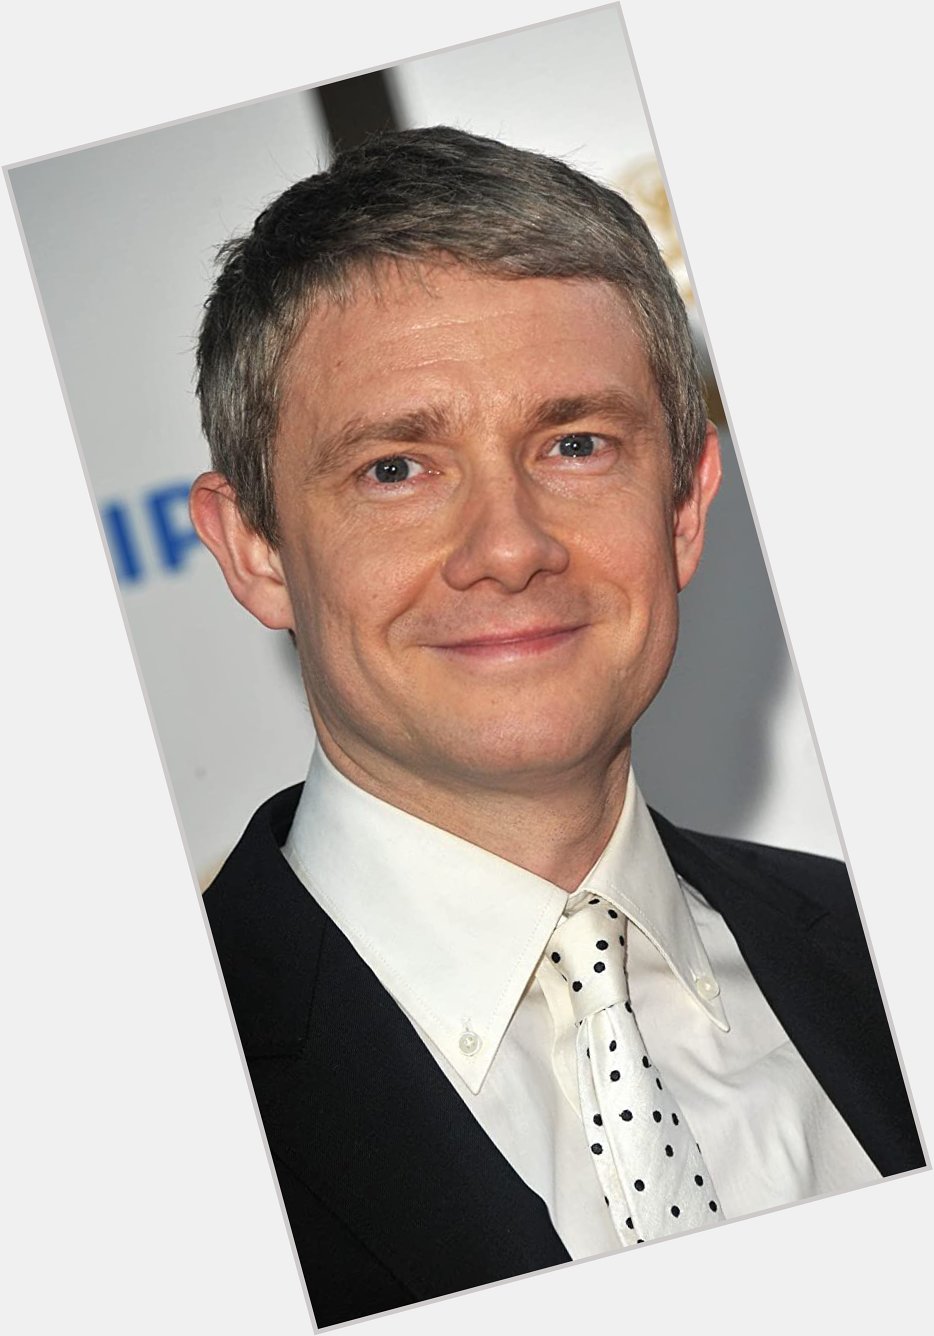 Happy birthday, Martin Freeman!
Hope he spends a great day with his family and friends. 